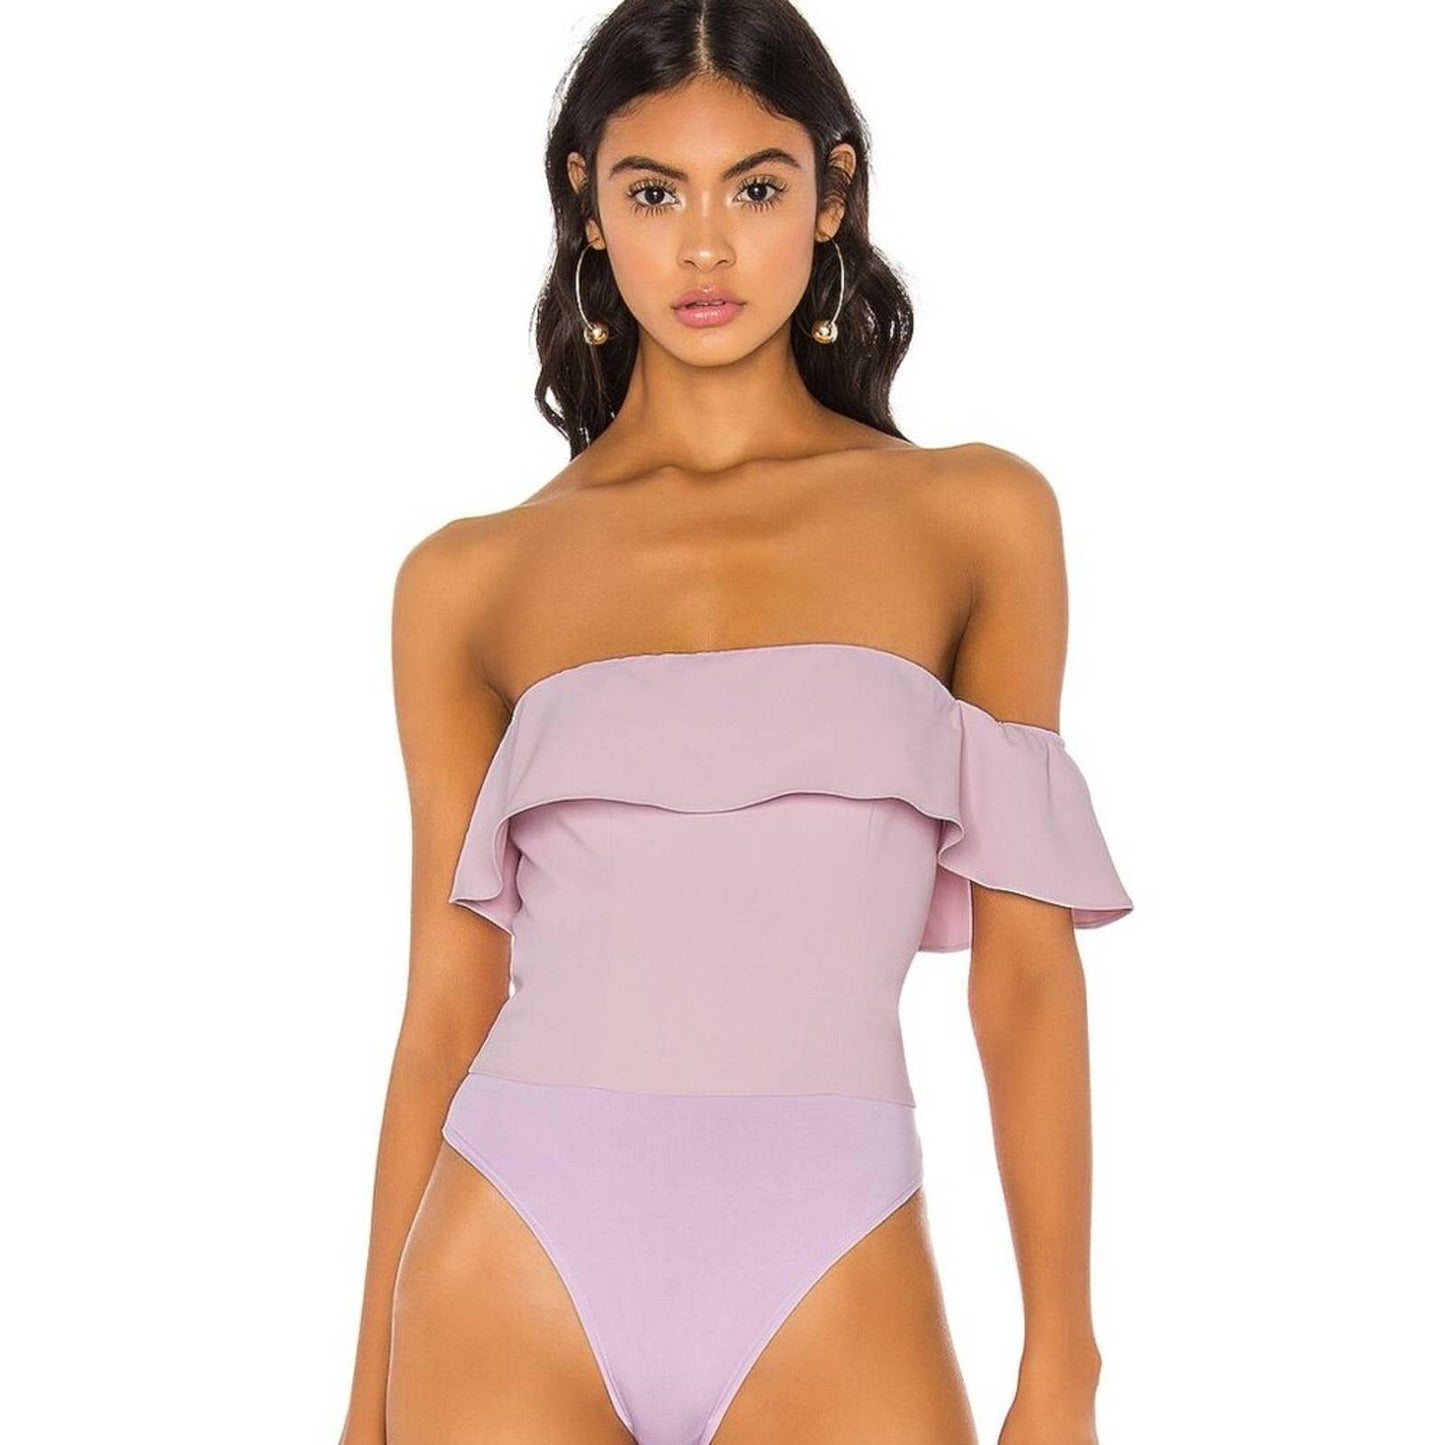 NBD x Naven Tiffany Bodysuit in Lilac NWT Size Small